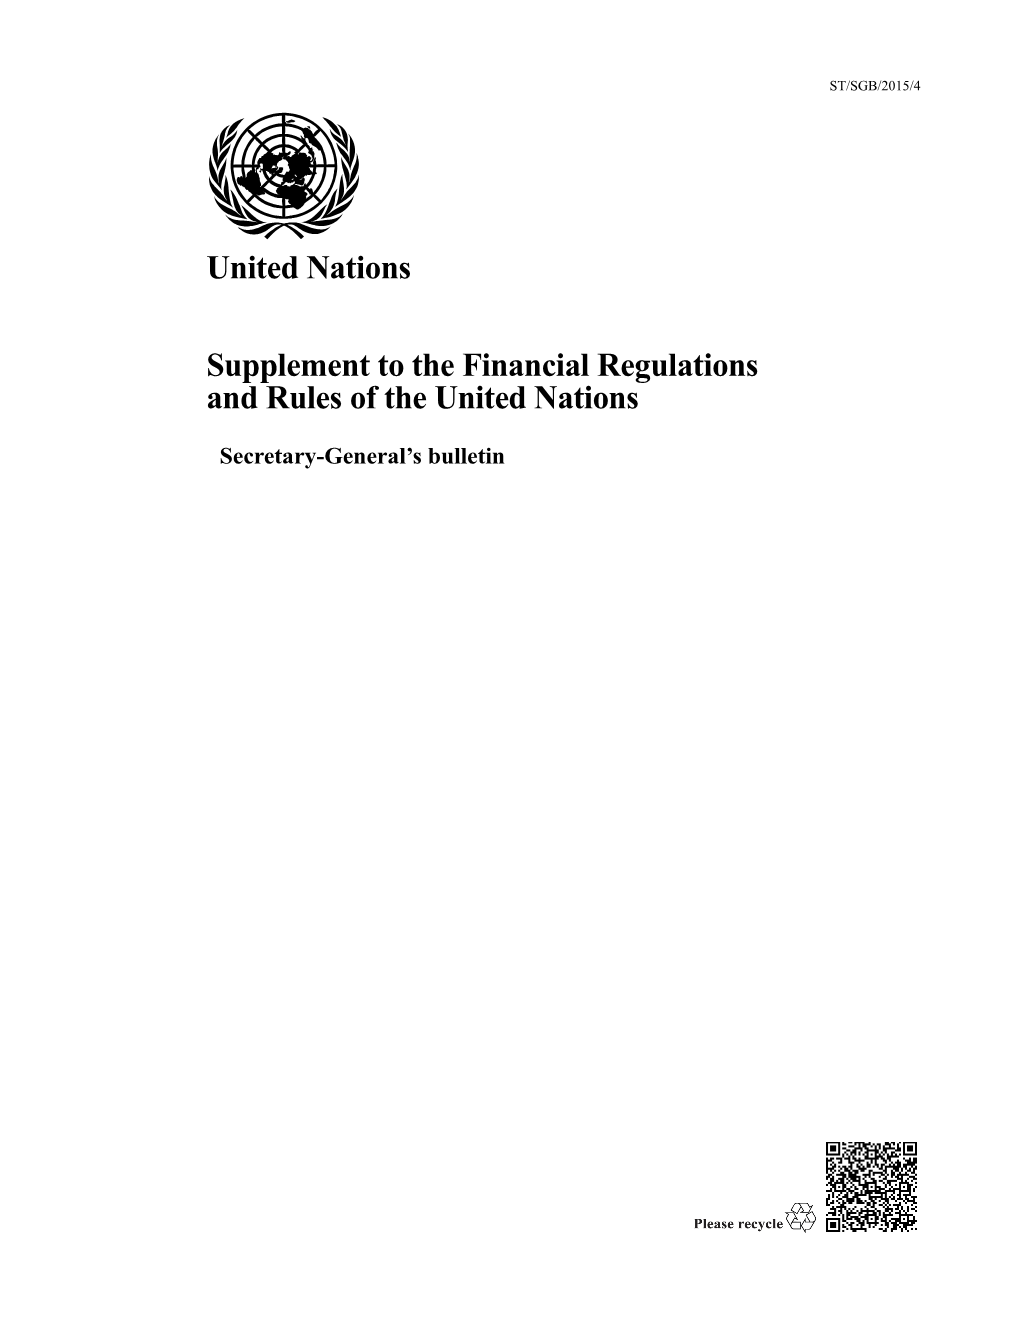 Supplement to the Financial Regulations and Rules of the United Nations